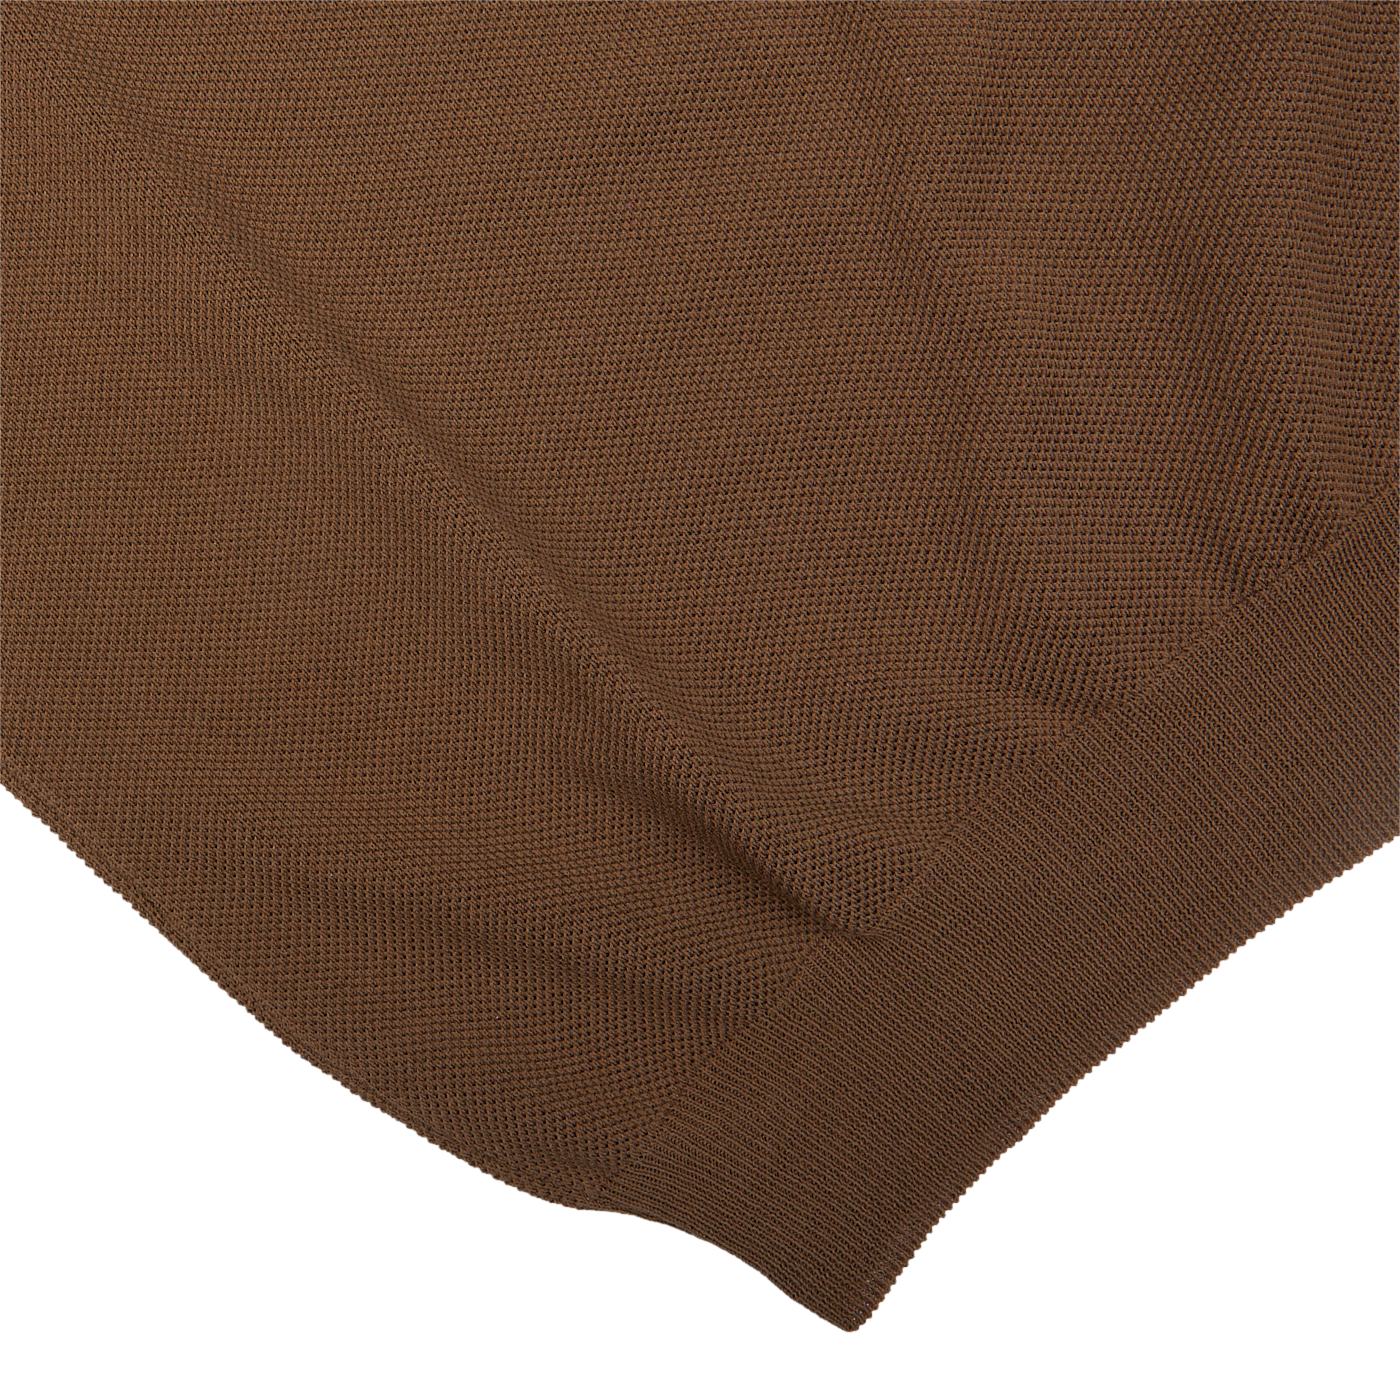 Close-up of a textured Mid-Brown Fresh Cotton Mesh Polo Shirt fabric by Gran Sasso with folded edge on a white background, highlighting its breathability.